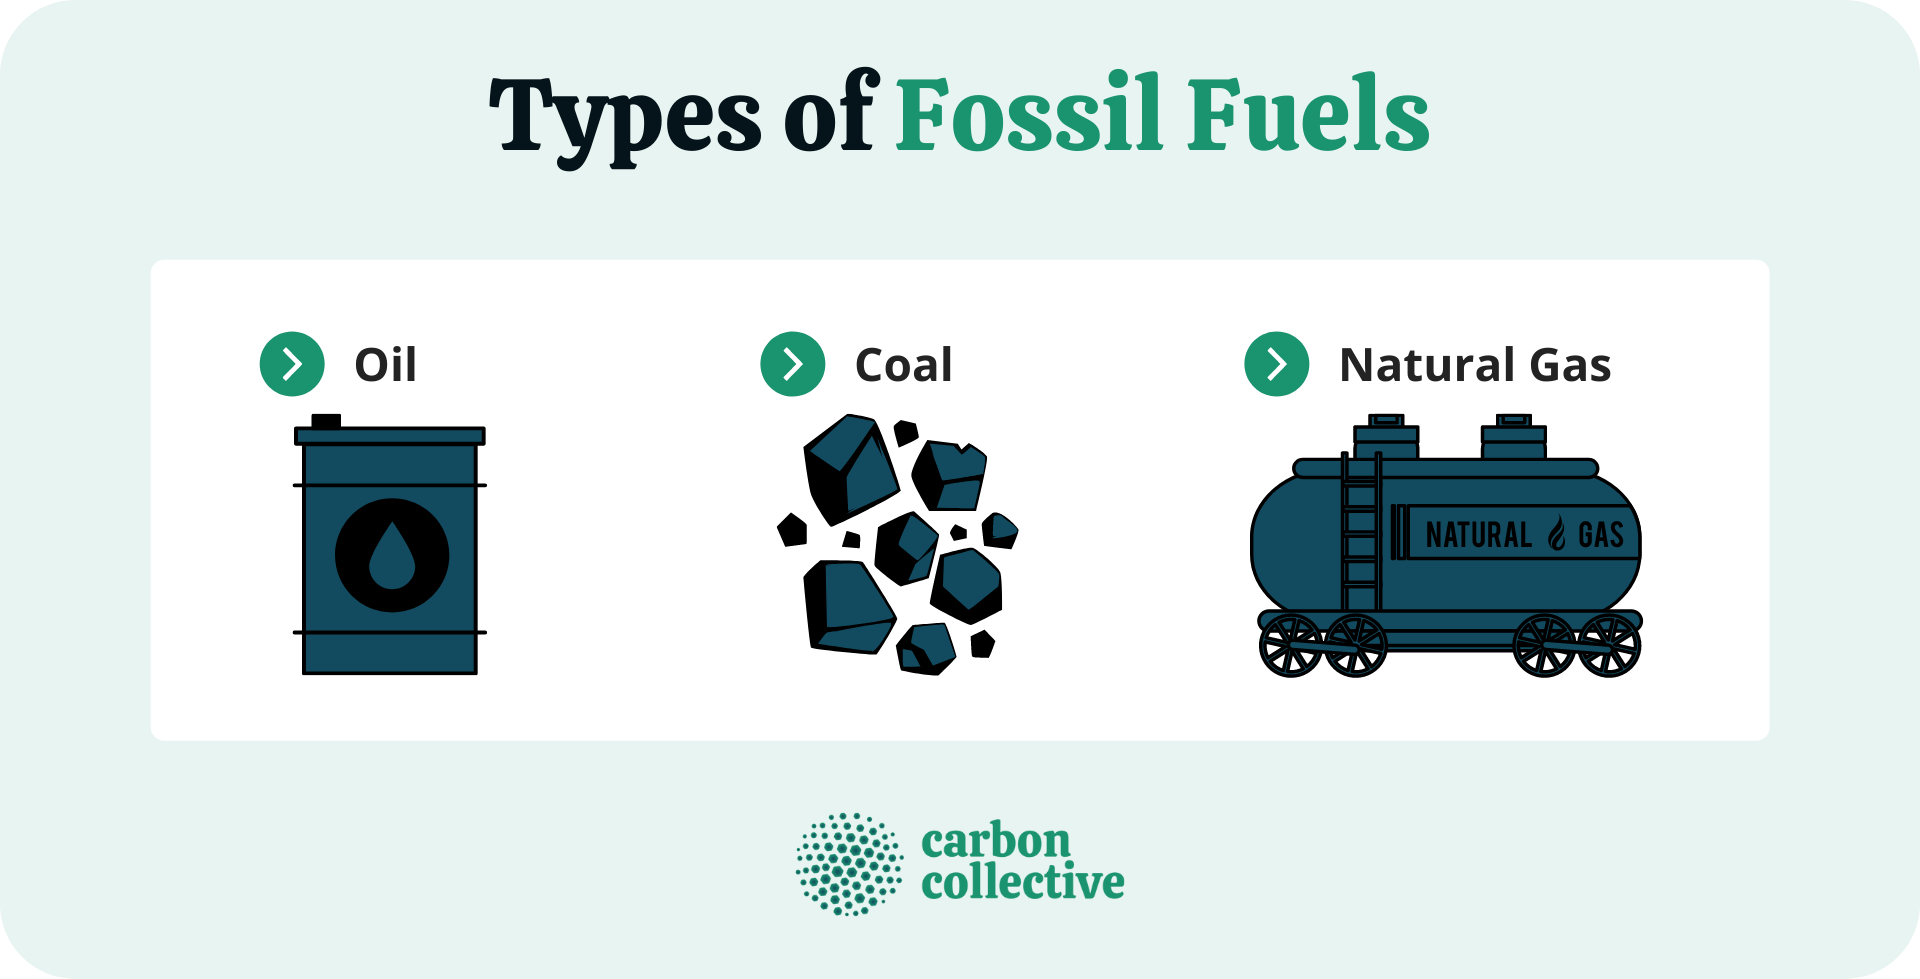 What Are Fossil Fuels? | Definition, Importance, Types, & Impacts